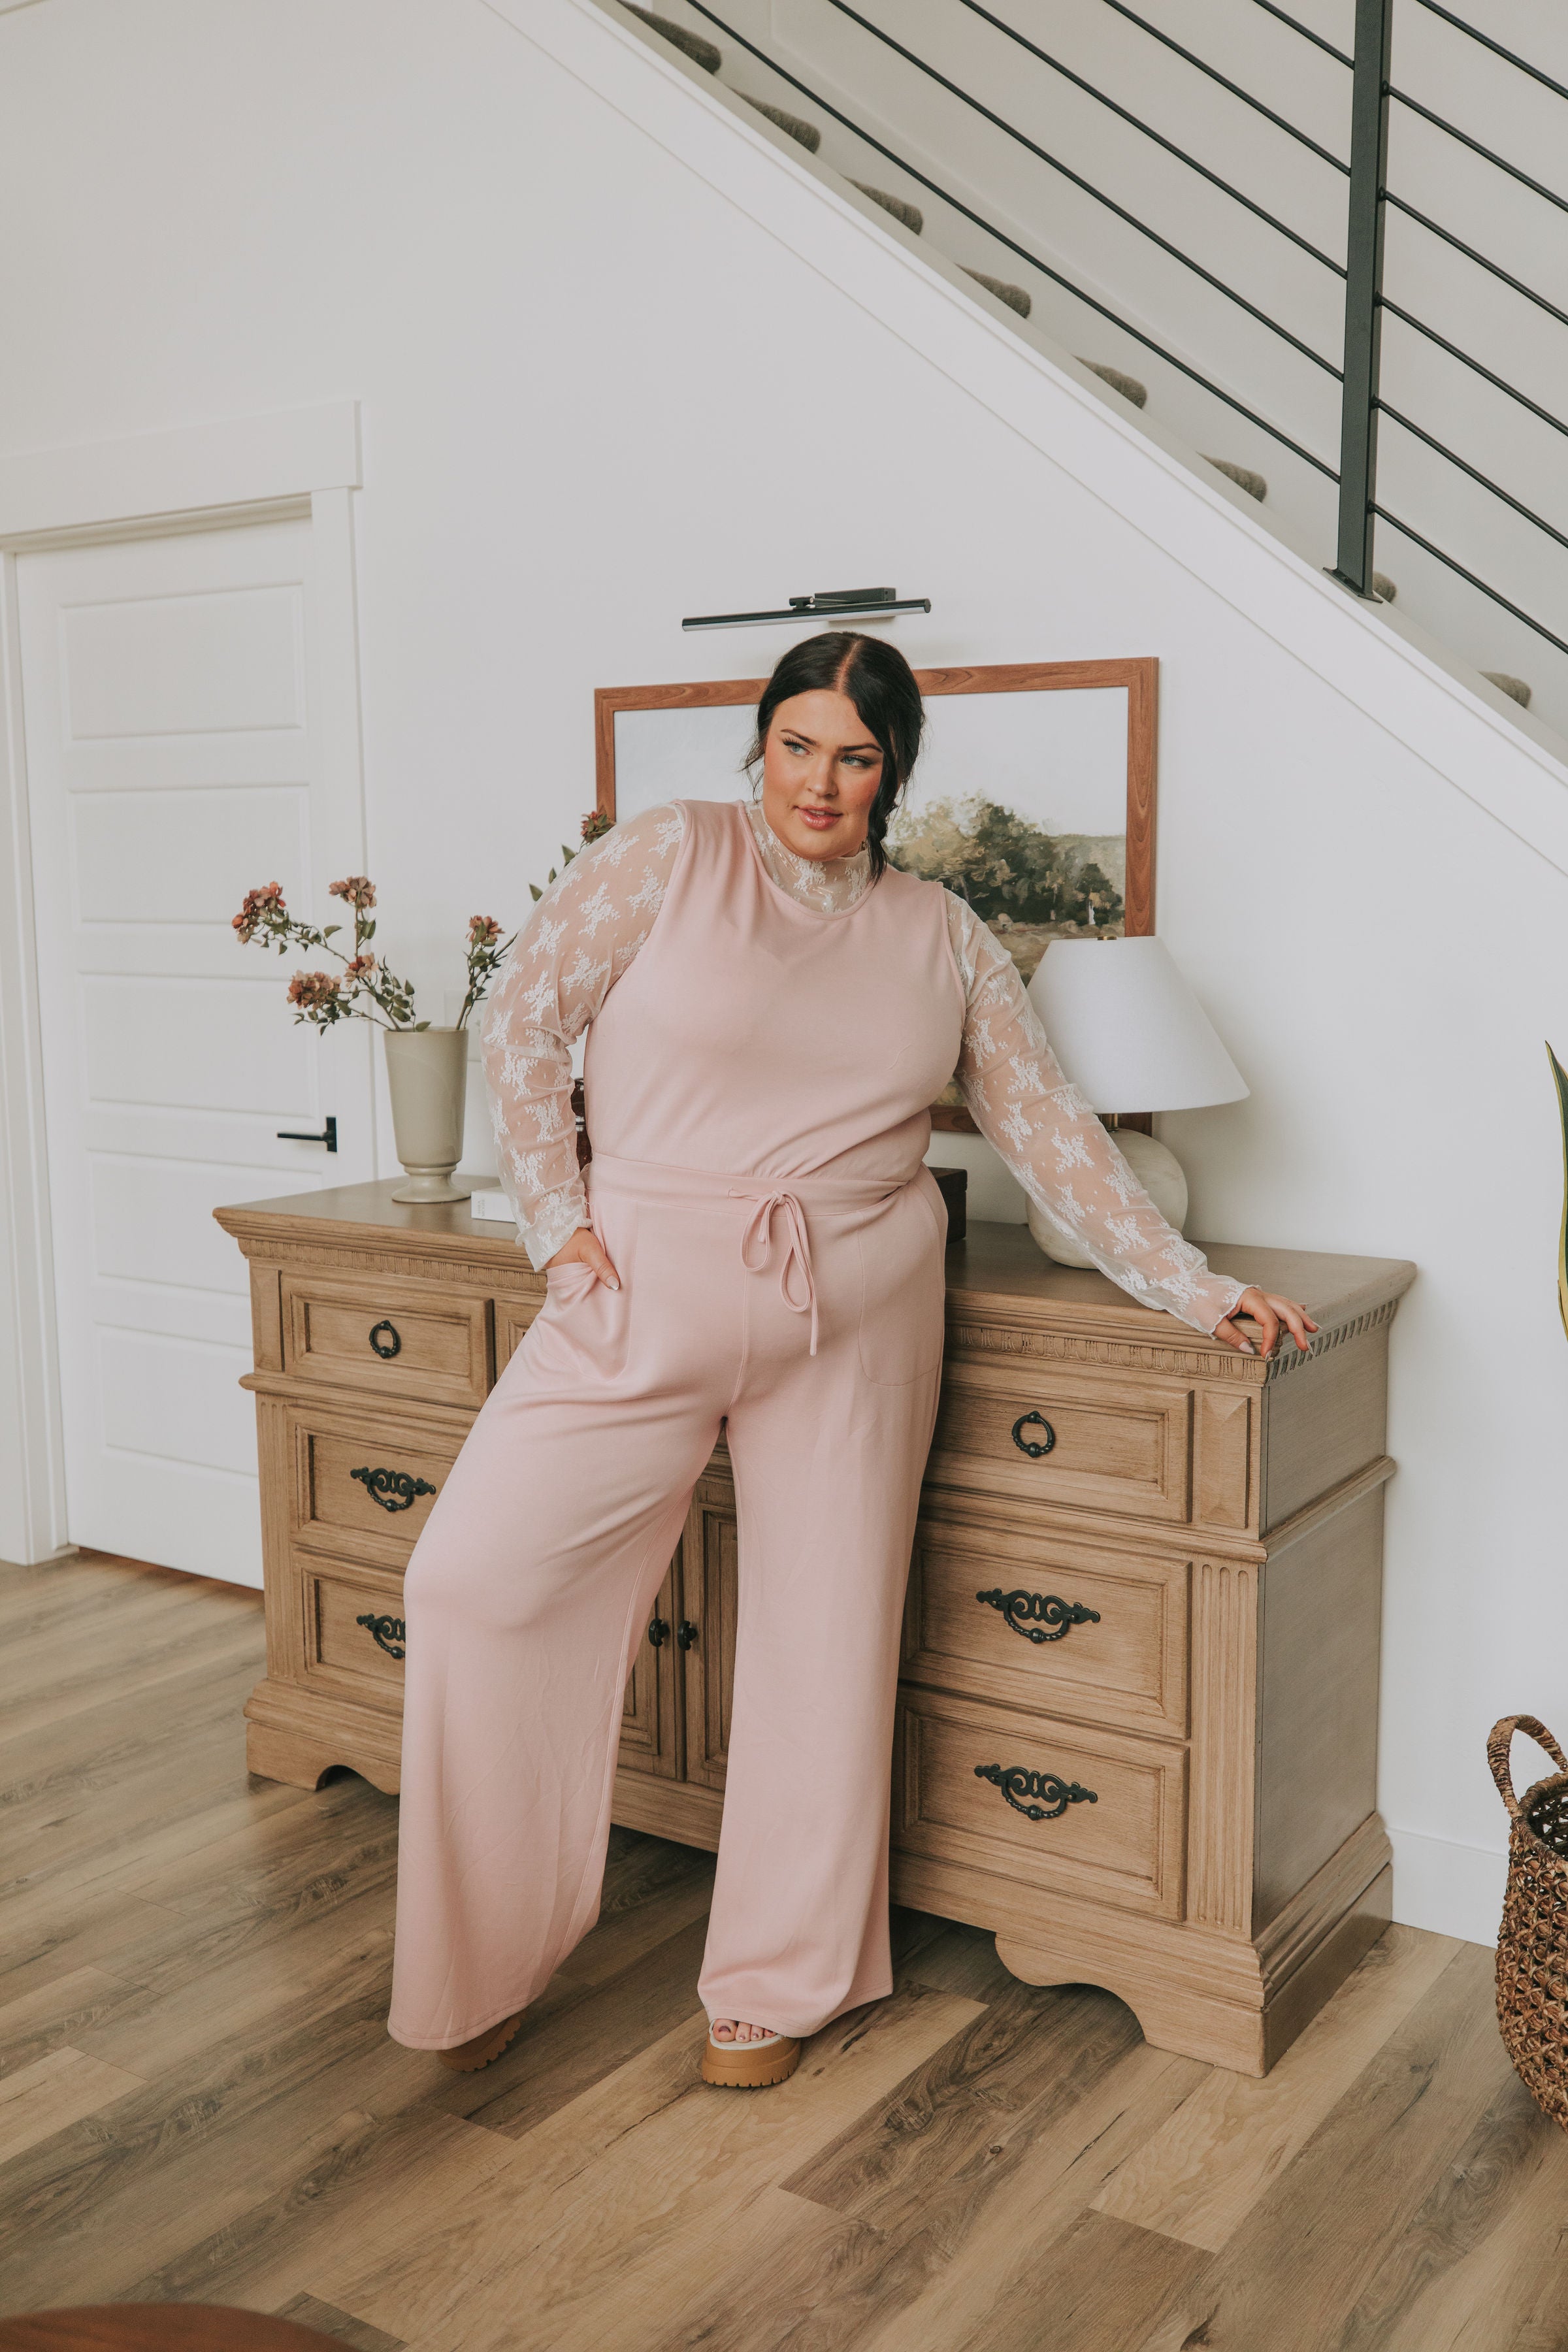 PLUS SIZE - On a Whim Jumpsuit